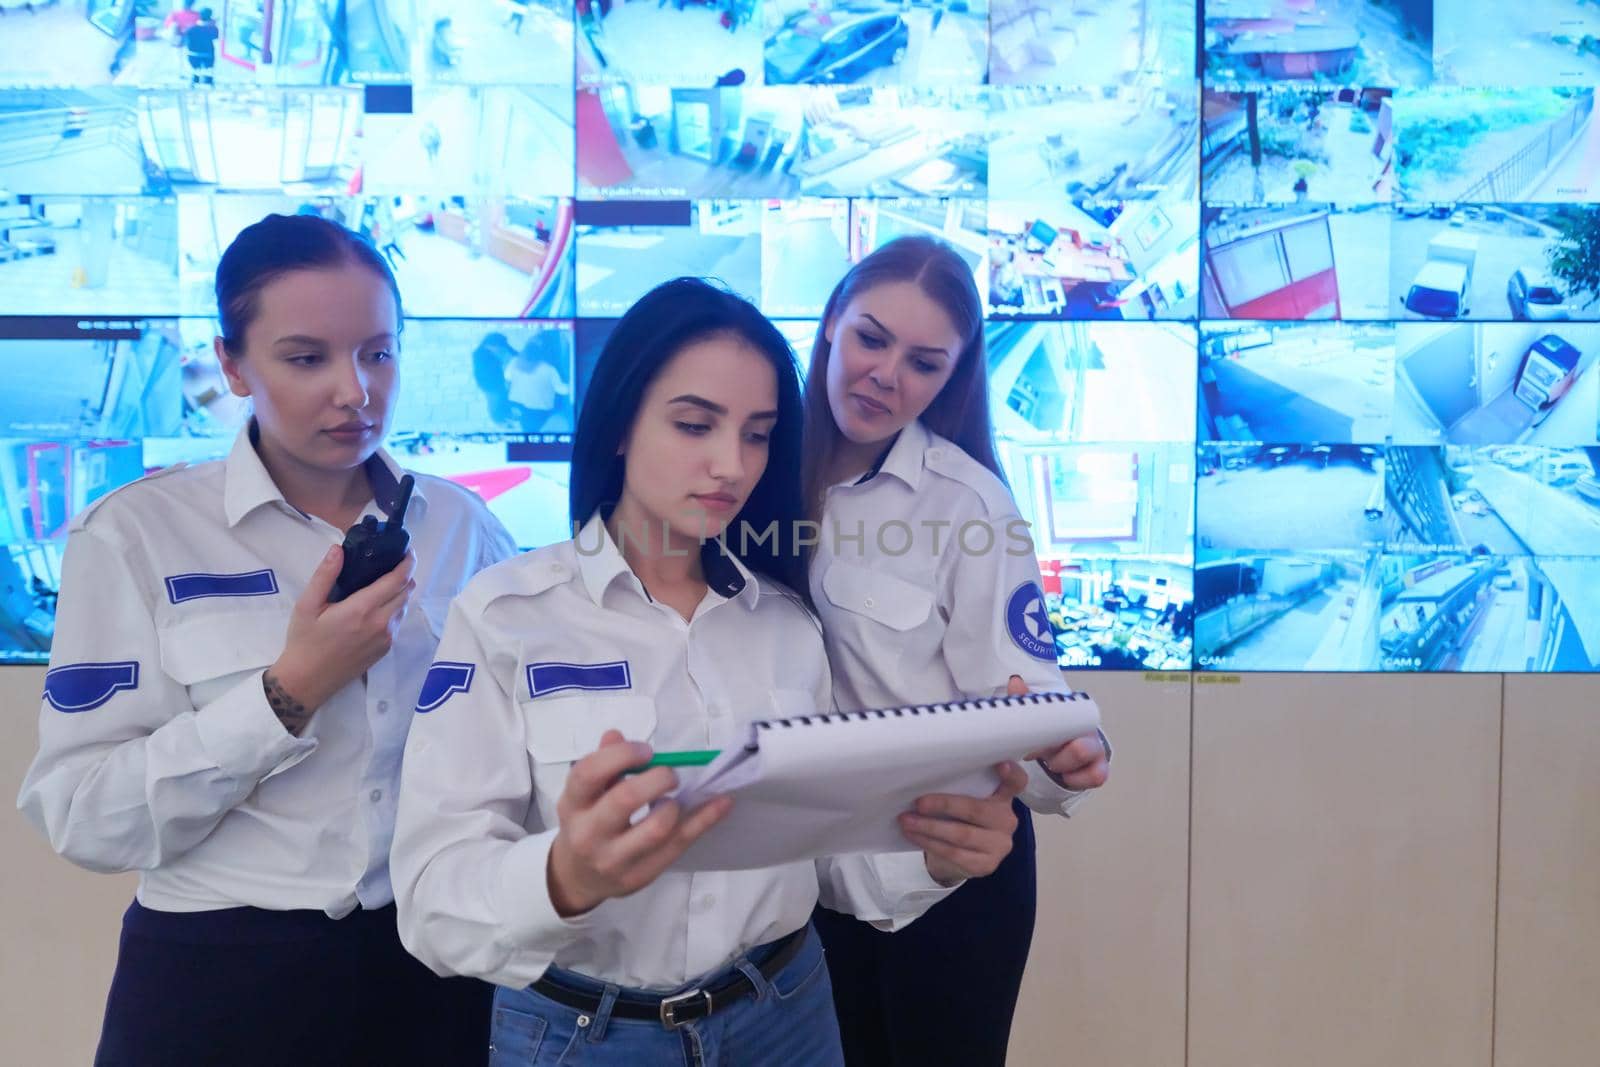 group of female security operators working in a data system control room  Technical Operators Working at  workstation with multiple displays, security guards working on multiple monitors in surveillance room, monitoring cctv and discussing